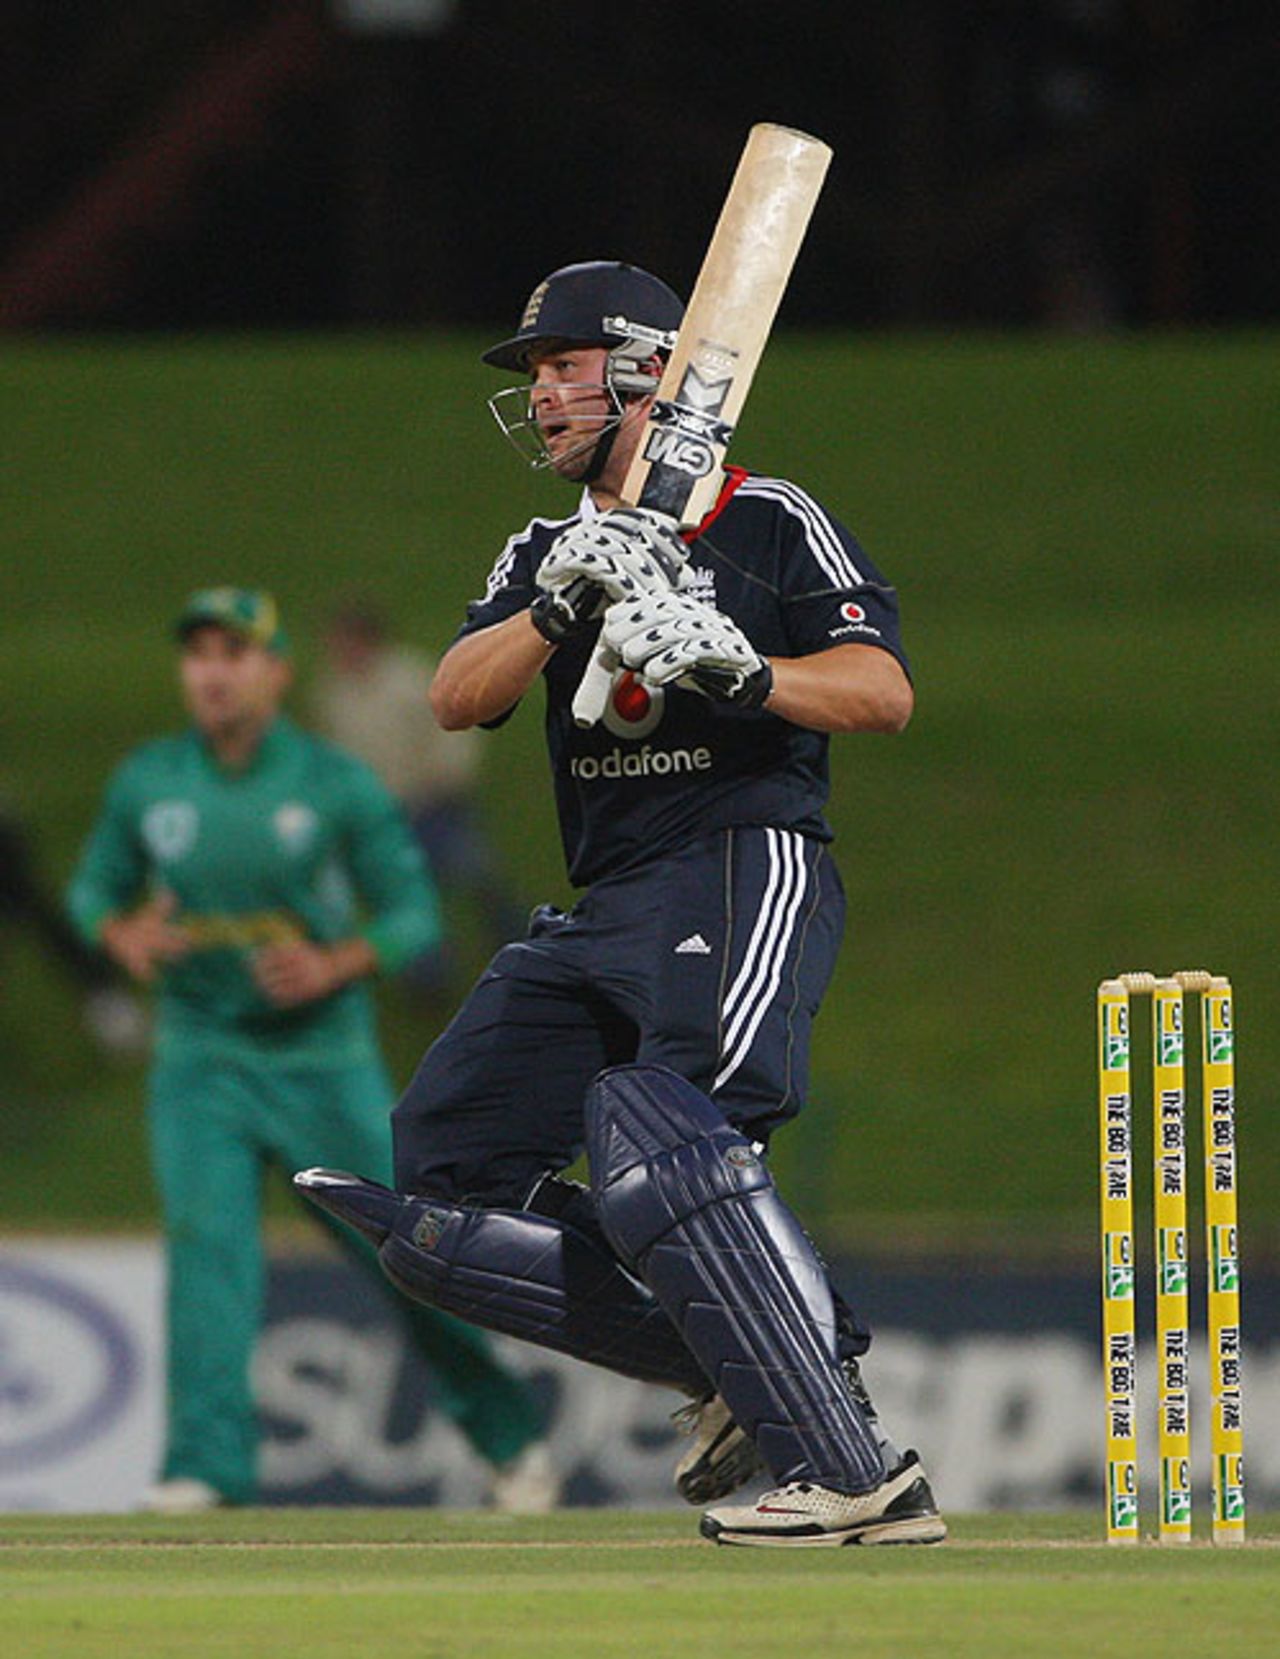 Jonathan Trott kept England's run-chase on track with 78 from 89 balls, England XI, South Africa A v England XI, Potchefstroom, Nov 17, 2009